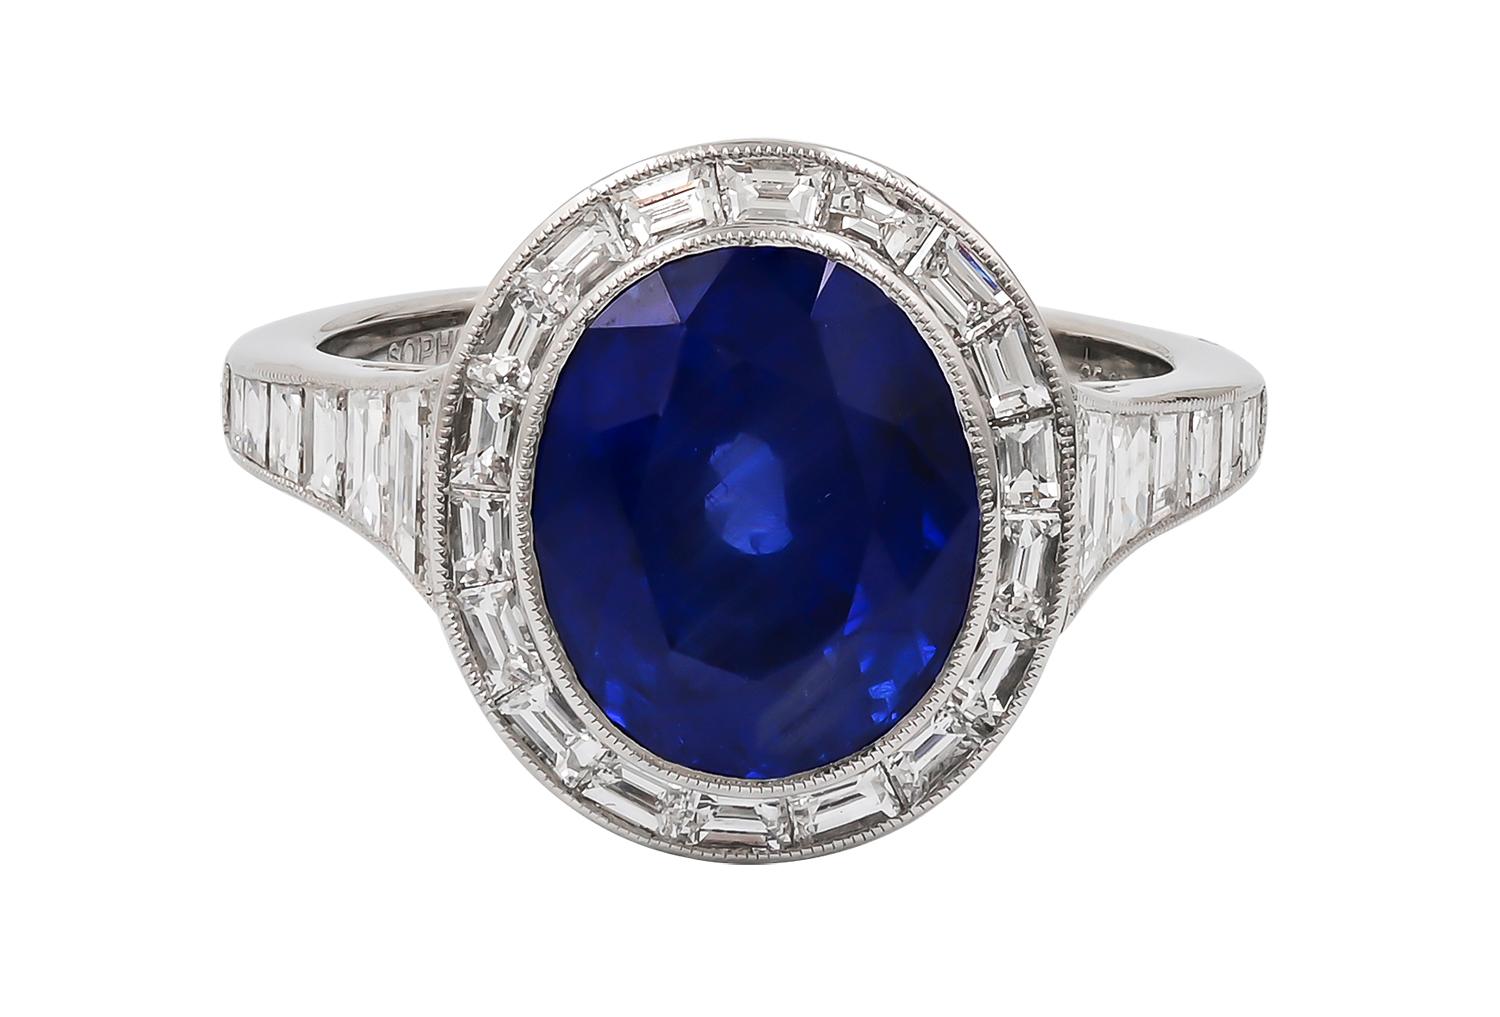 Sophia D Platinum Ring that features 5.07 carat of Blue Sapphire as a center stone surrounded with 1.26 carats of diamonds.

The ring size is a 6.5 and available for resizing.

Sophia D by Joseph Dardashti LTD has been known worldwide for 35 years